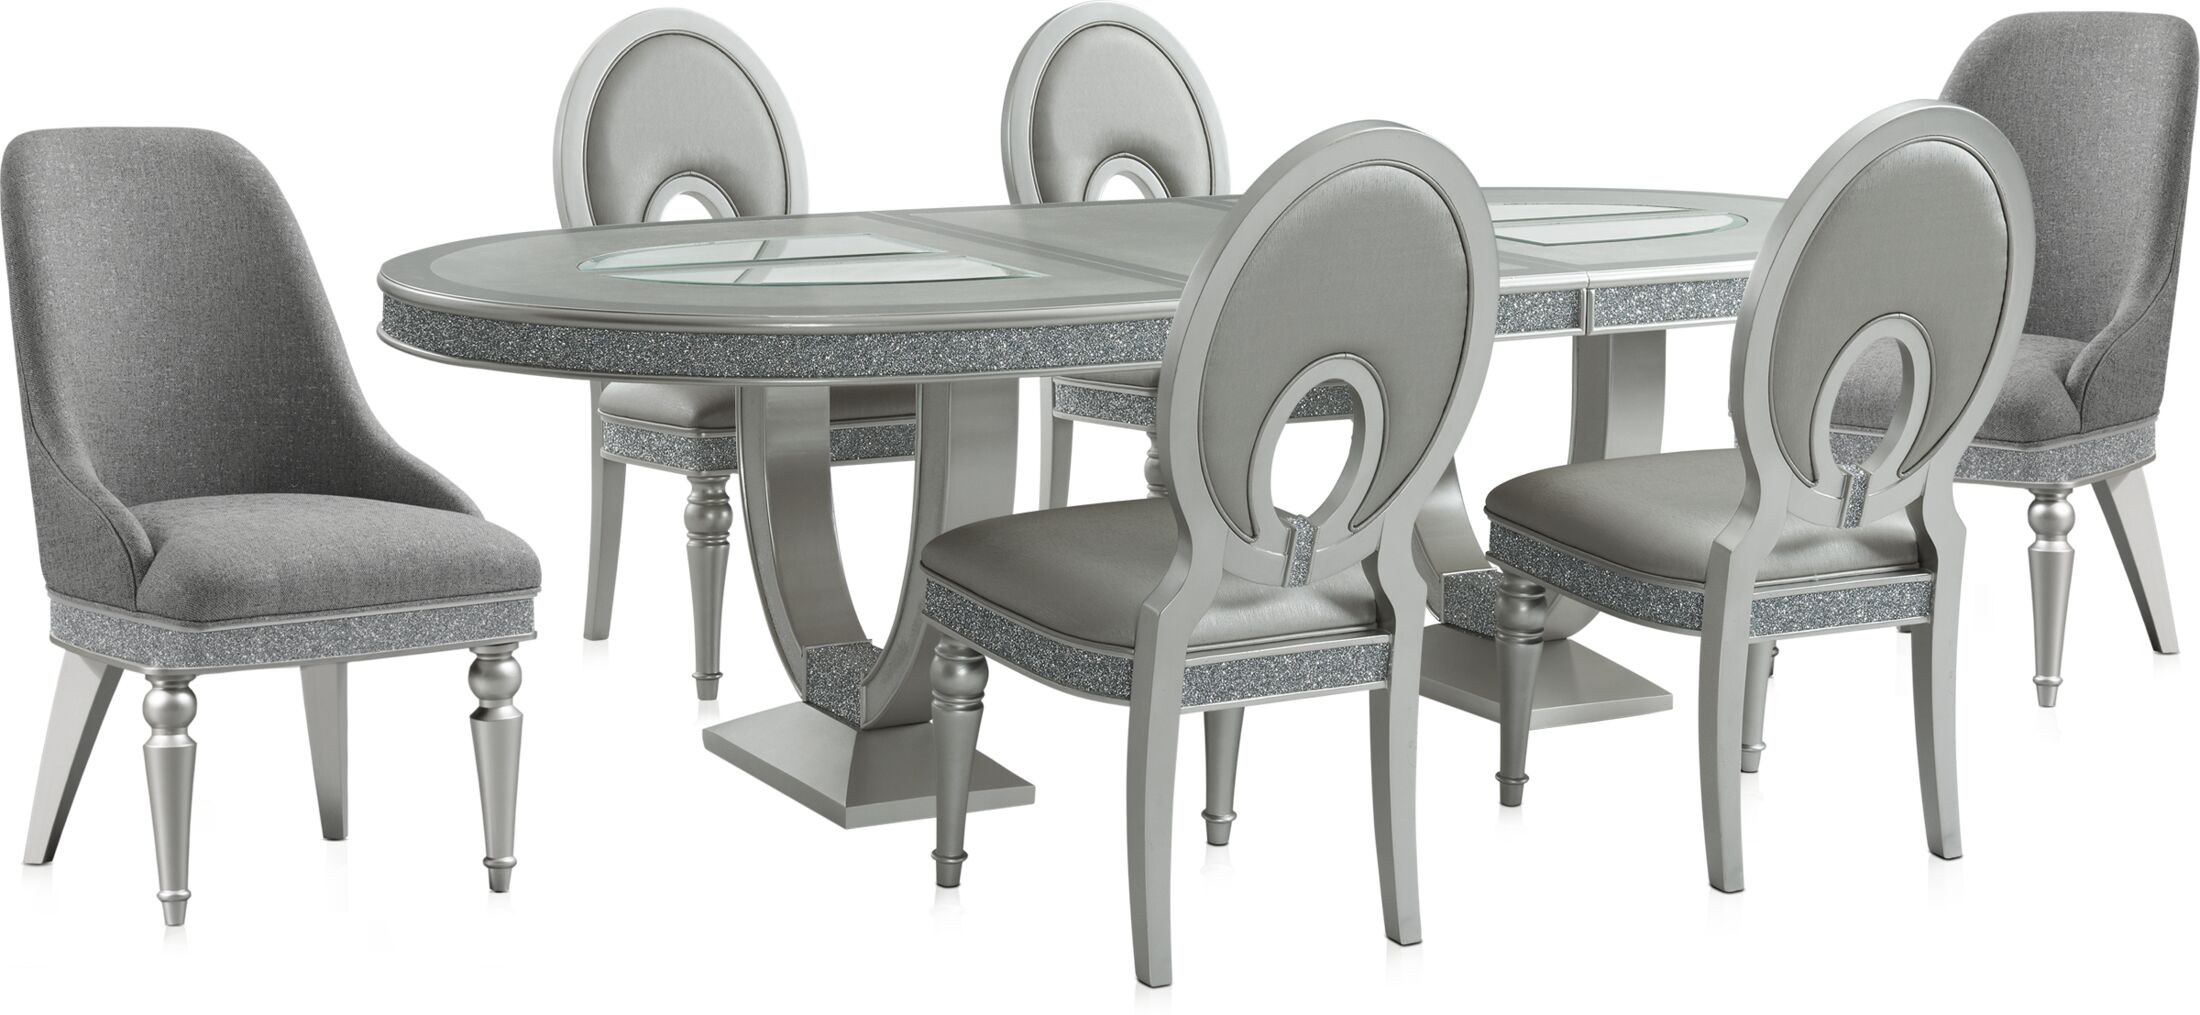 Posh Dining Table, 4 Dining Chairs and 2 Host Chairs | American Signature  Furniture